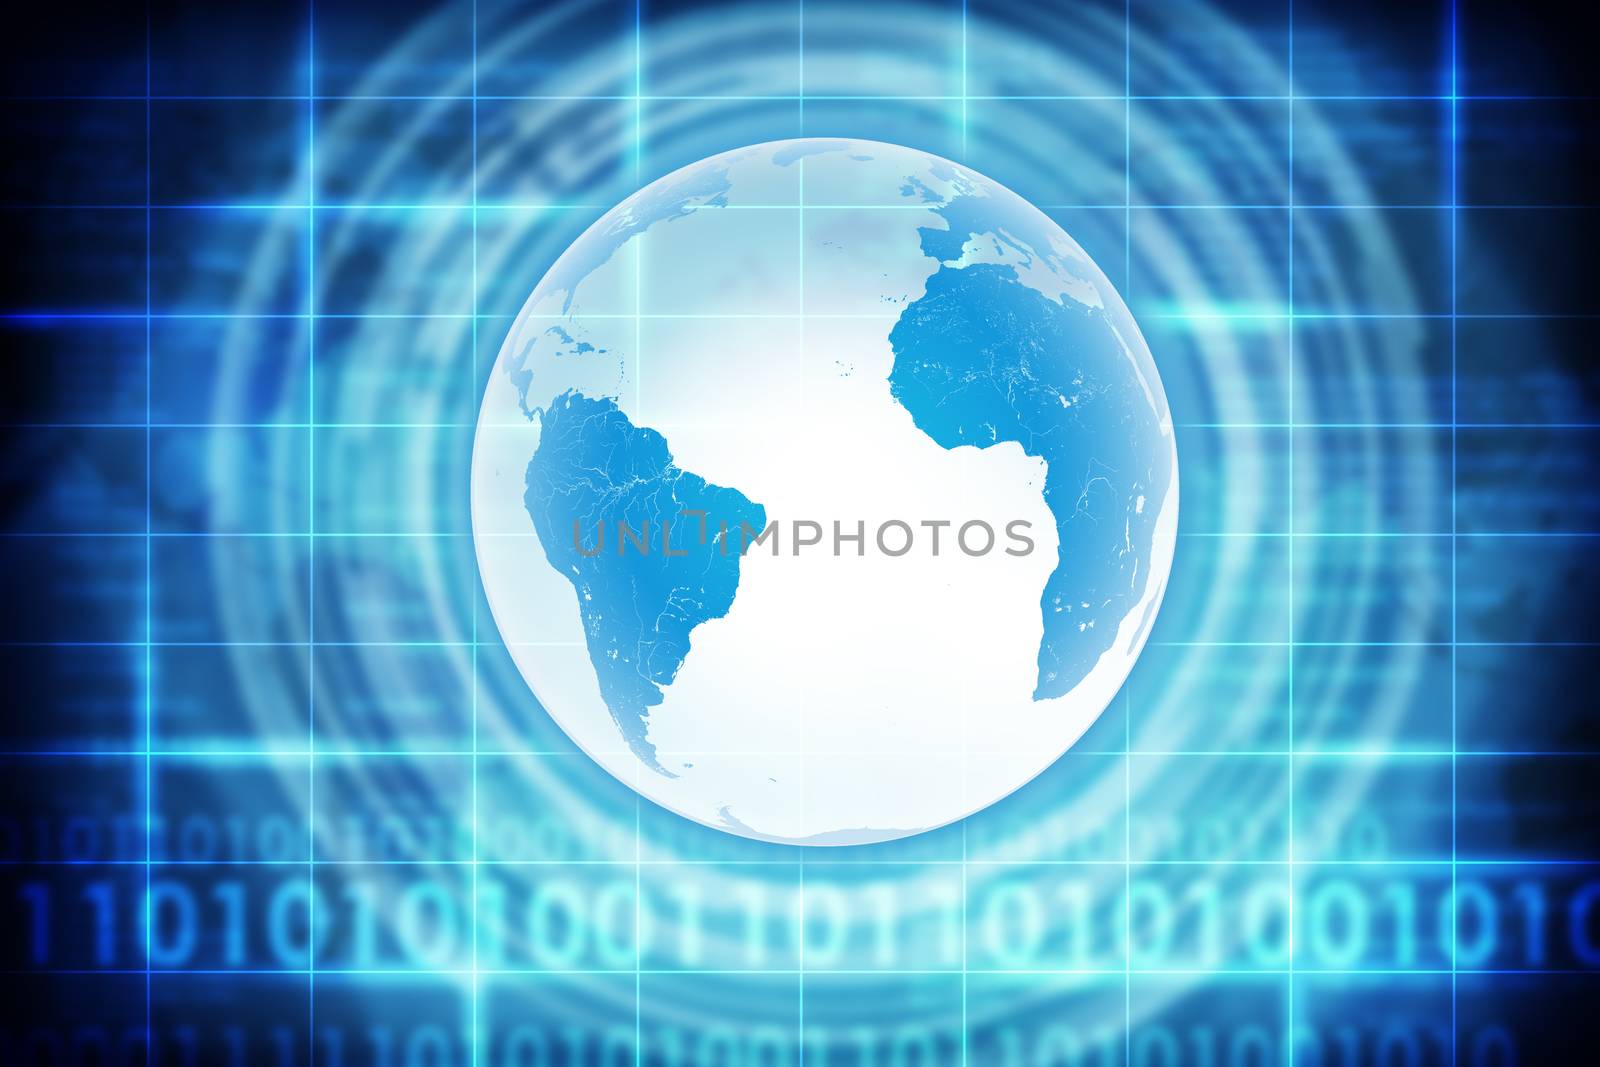 Abstract blue background with Earth and numbers. Elements of this image furnished by NASA